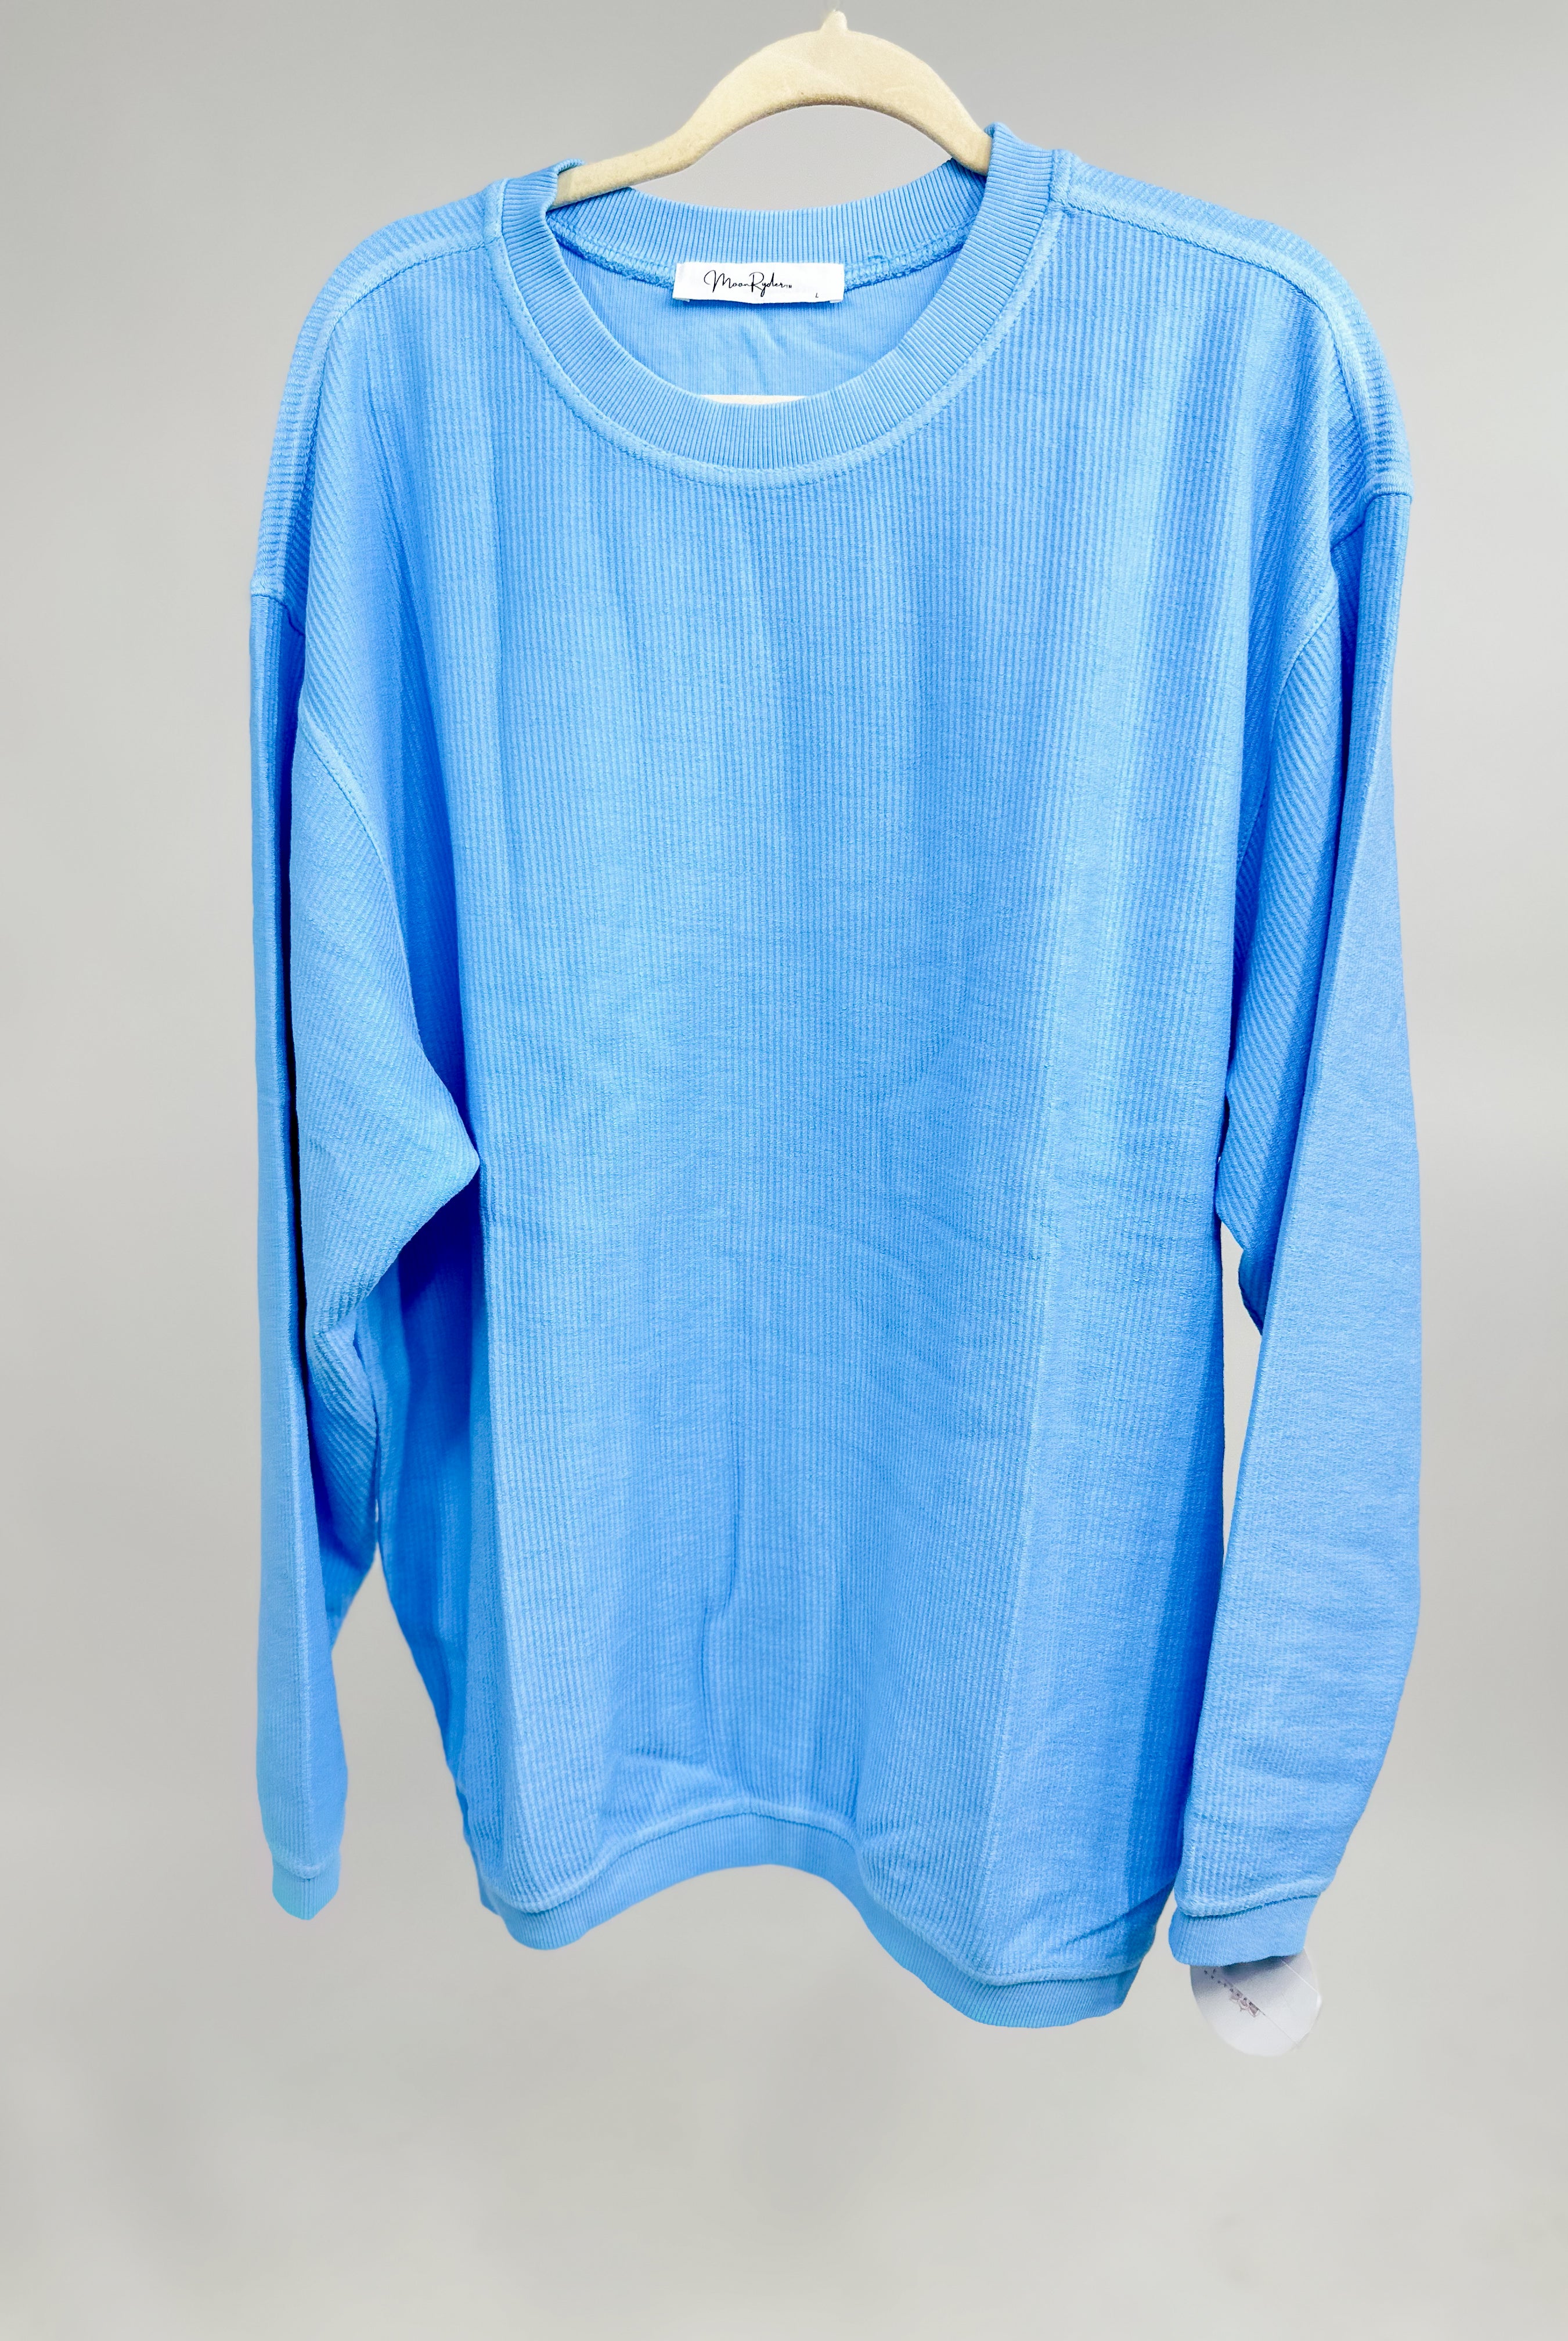 Neon Blue Essential Luxe Crew Sweatshirt-120 Long Sleeve Tops-Moon Ryder-Heathered Boho Boutique, Women's Fashion and Accessories in Palmetto, FL